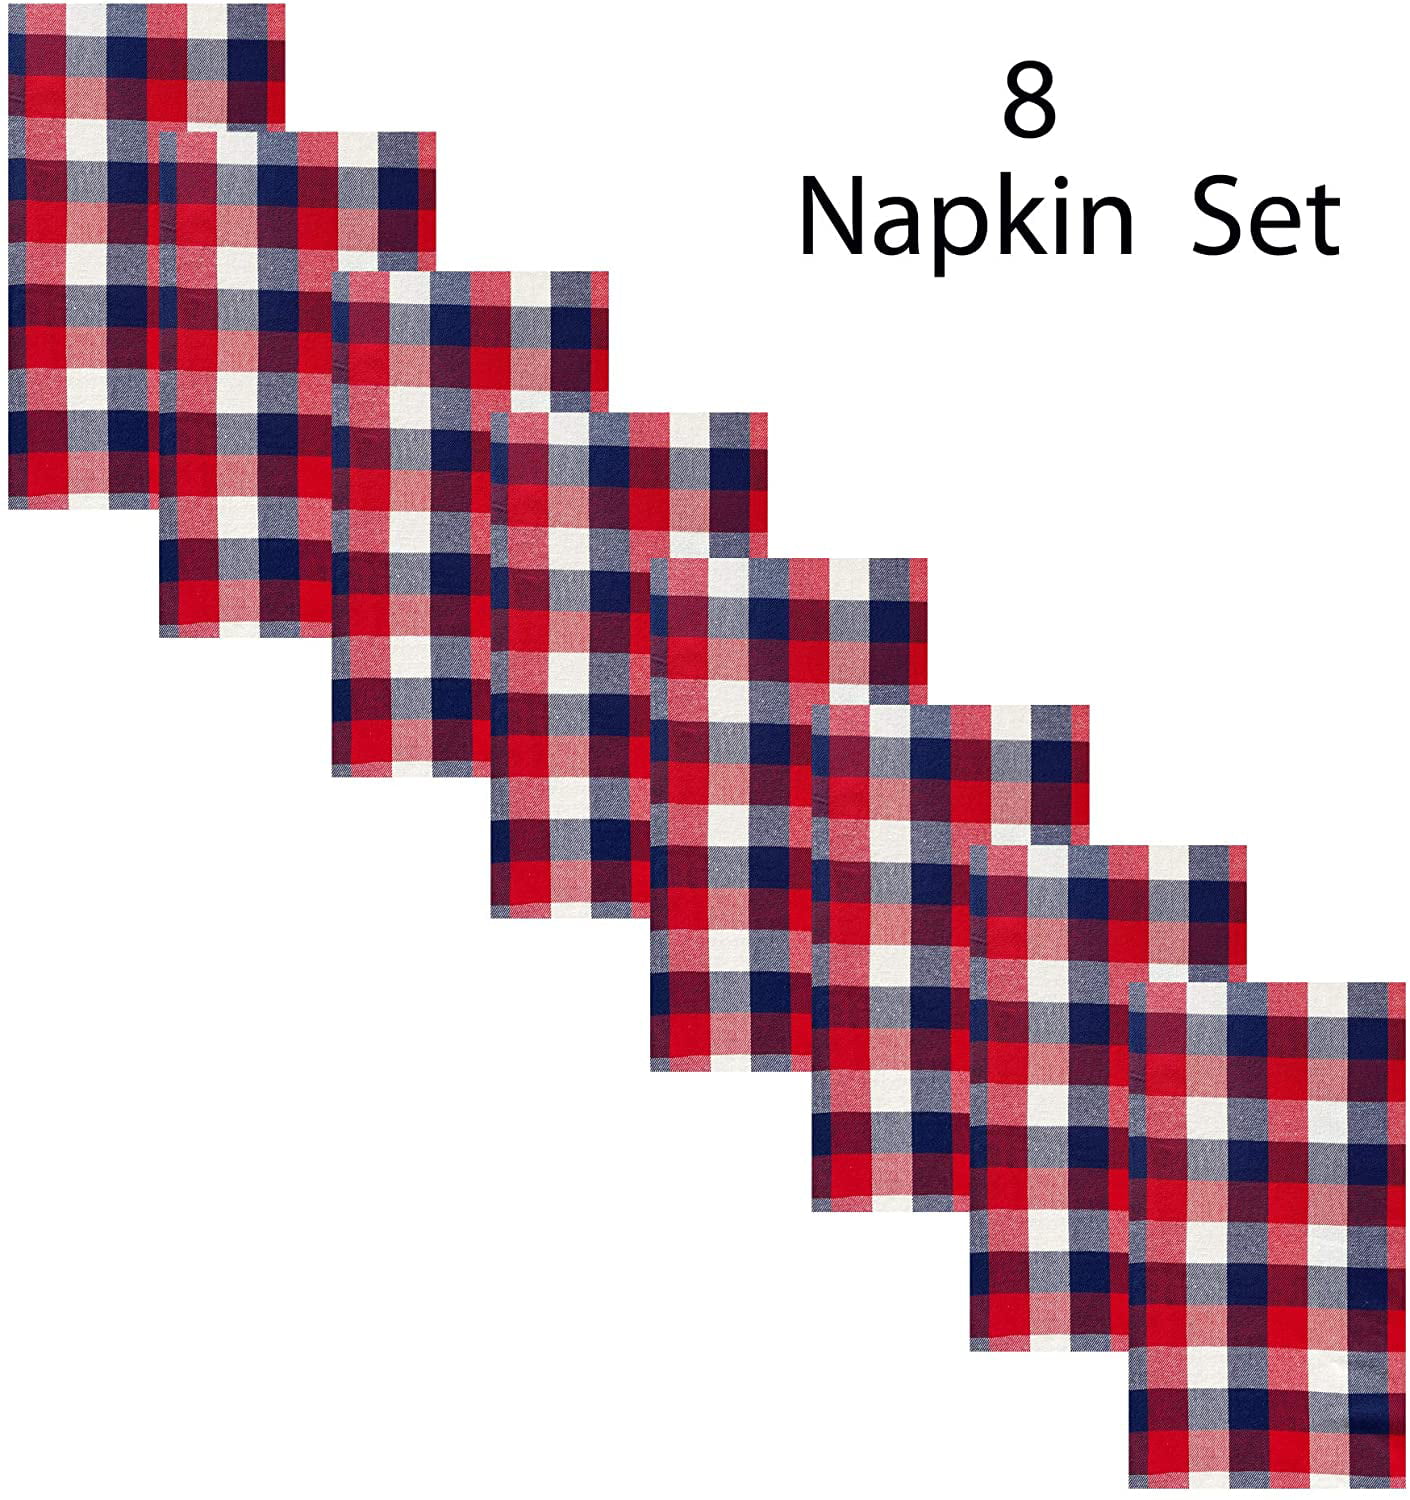 Newbridge American Rustic Red Indoor Outdoor Country Rustic Patriotic Woven Plaid Tablecloth 60  x 84 Oblong/Rectangle White and Blue Plaid Cotton Weave Fabric Tablecloth 